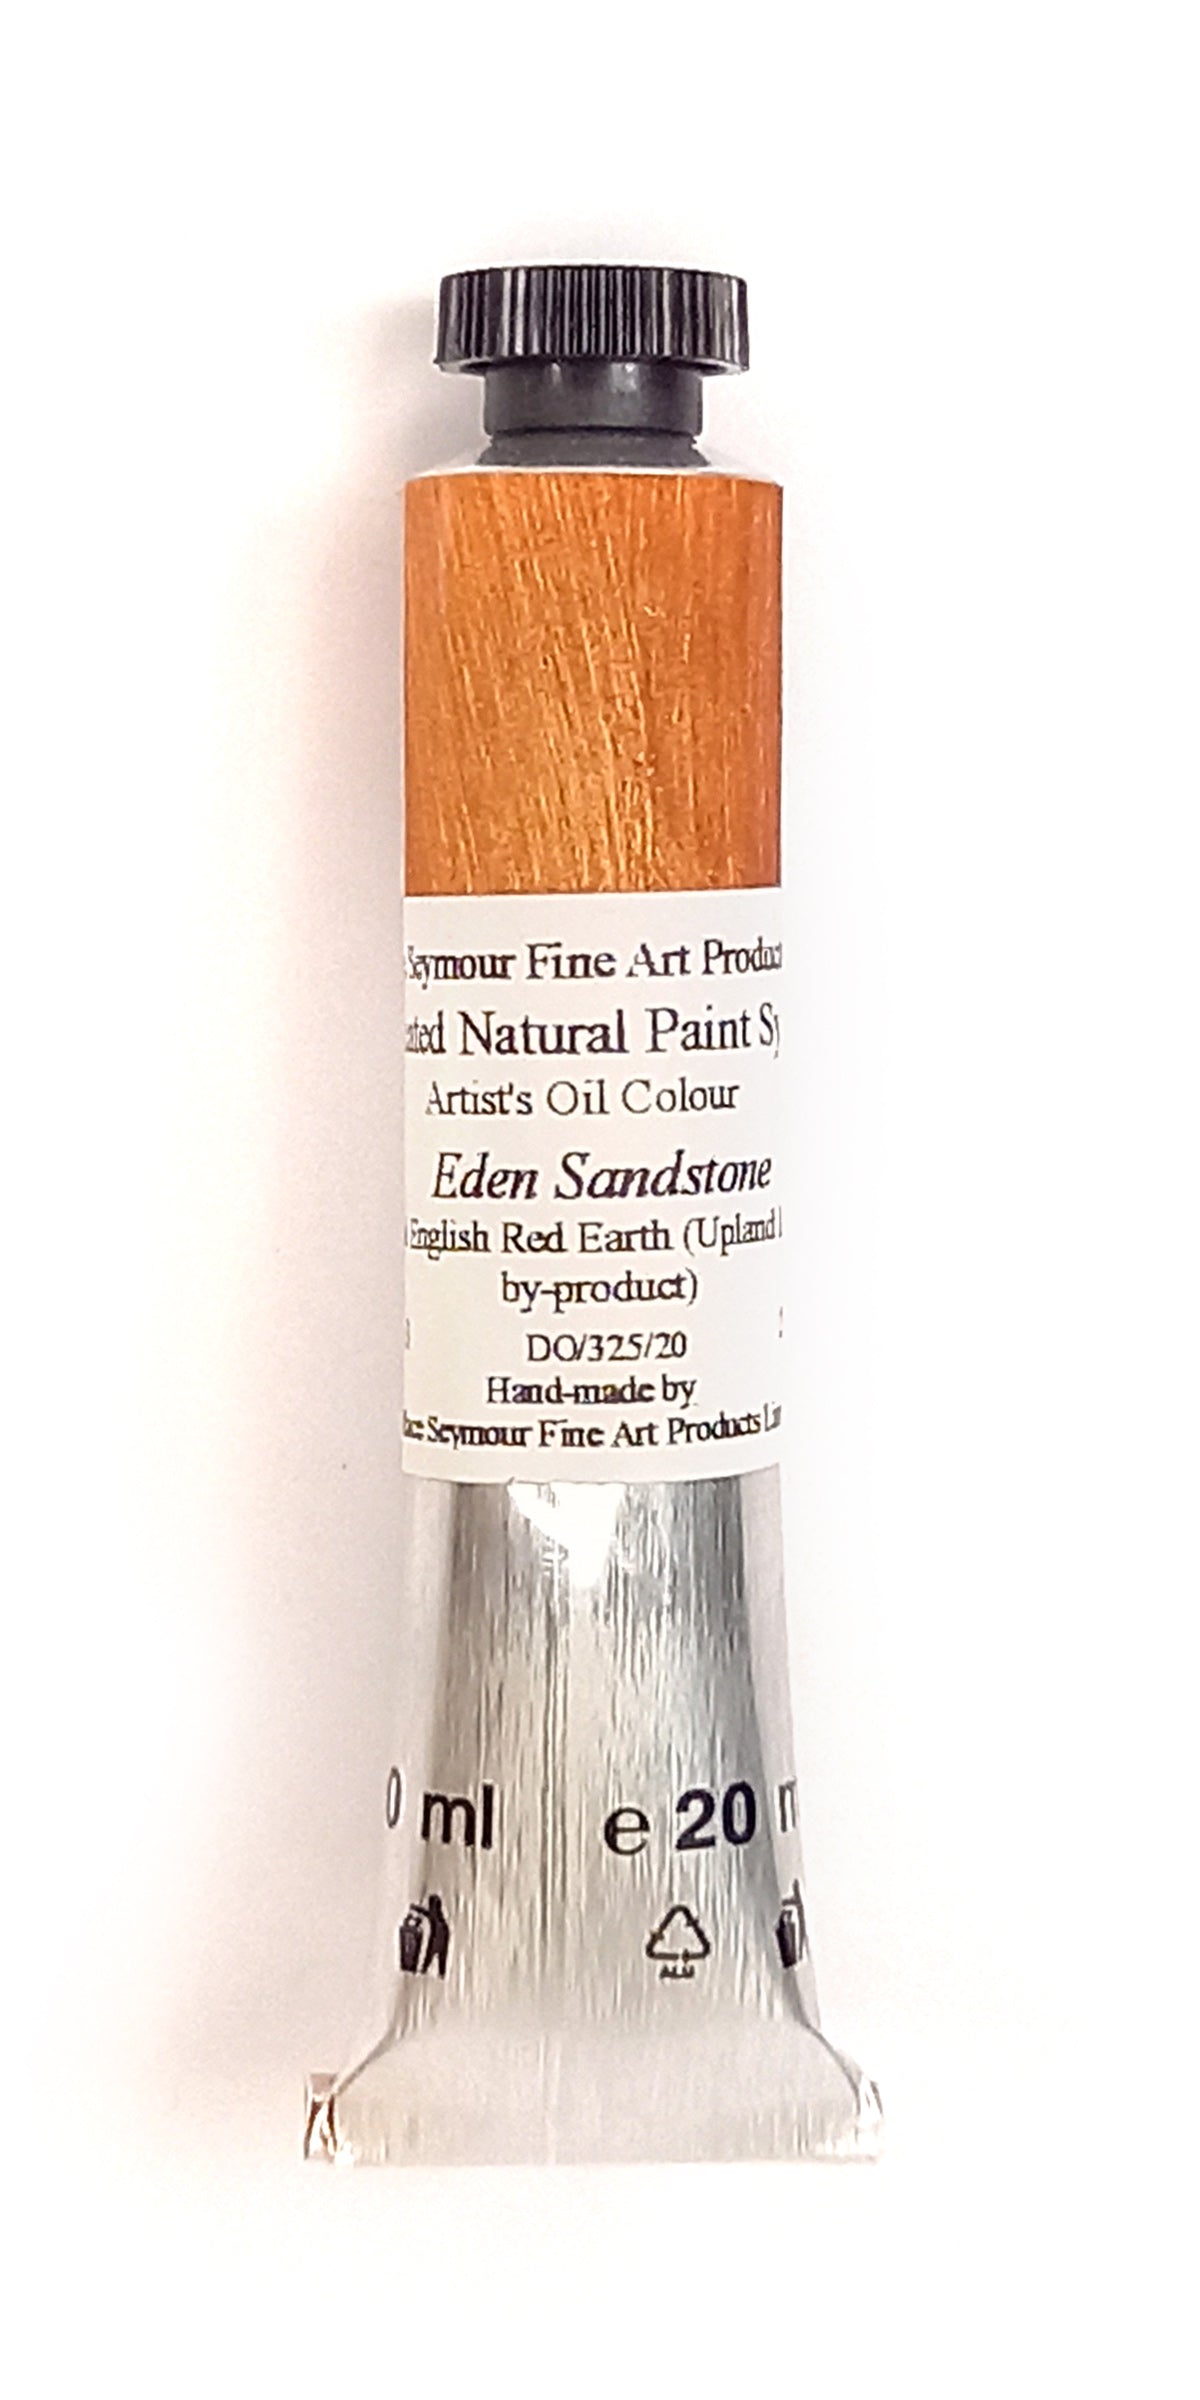 Wallace Seymour - Natural Paint System - Oil -  Eden Sandstone (Natural English Red Earth - Farming by-product)